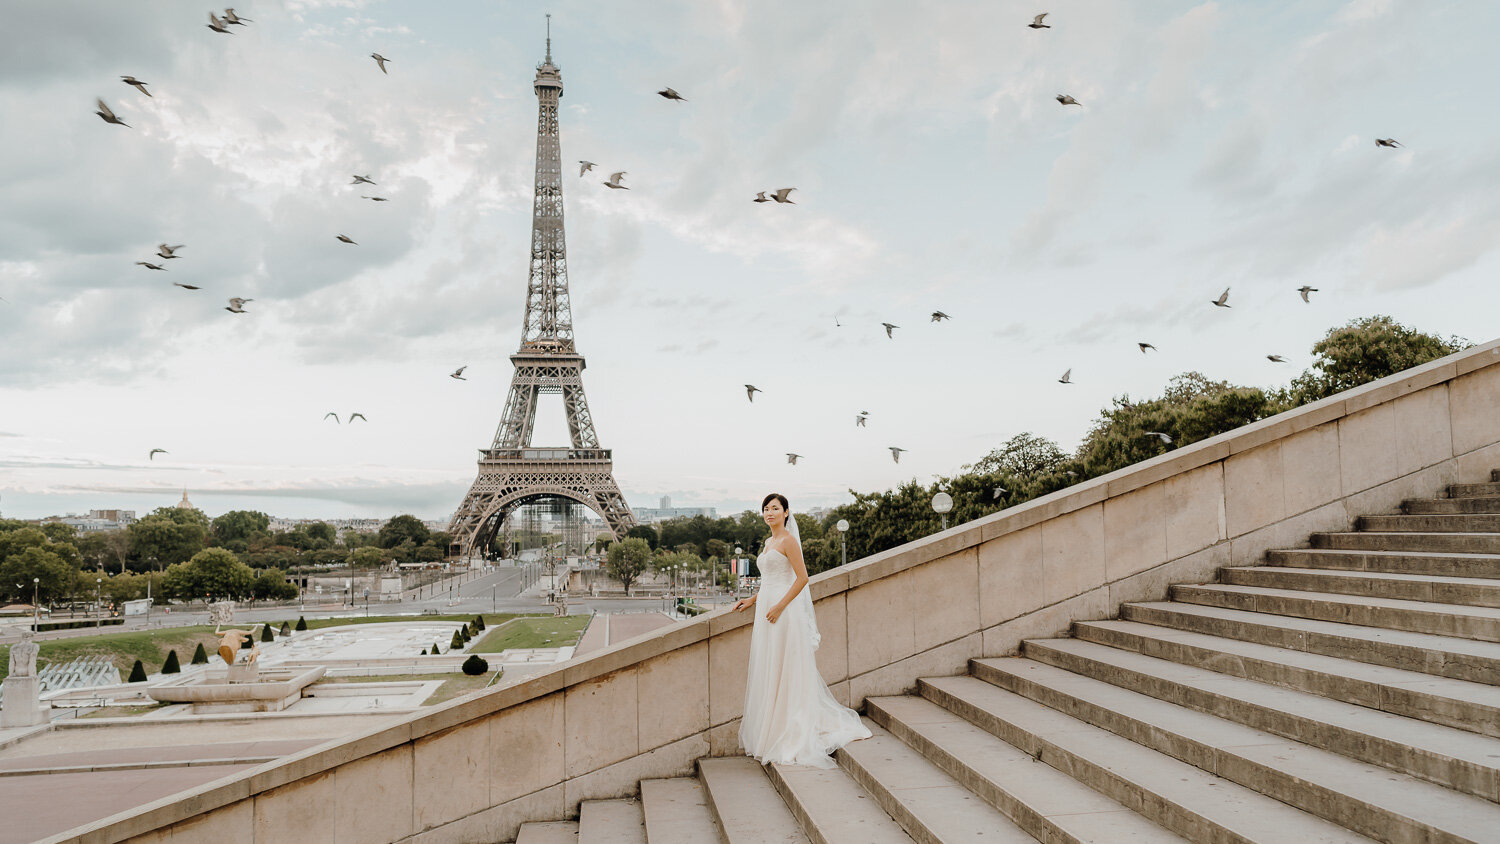 Bridal shoot in Paris France by the Eiffel Tower view stairs